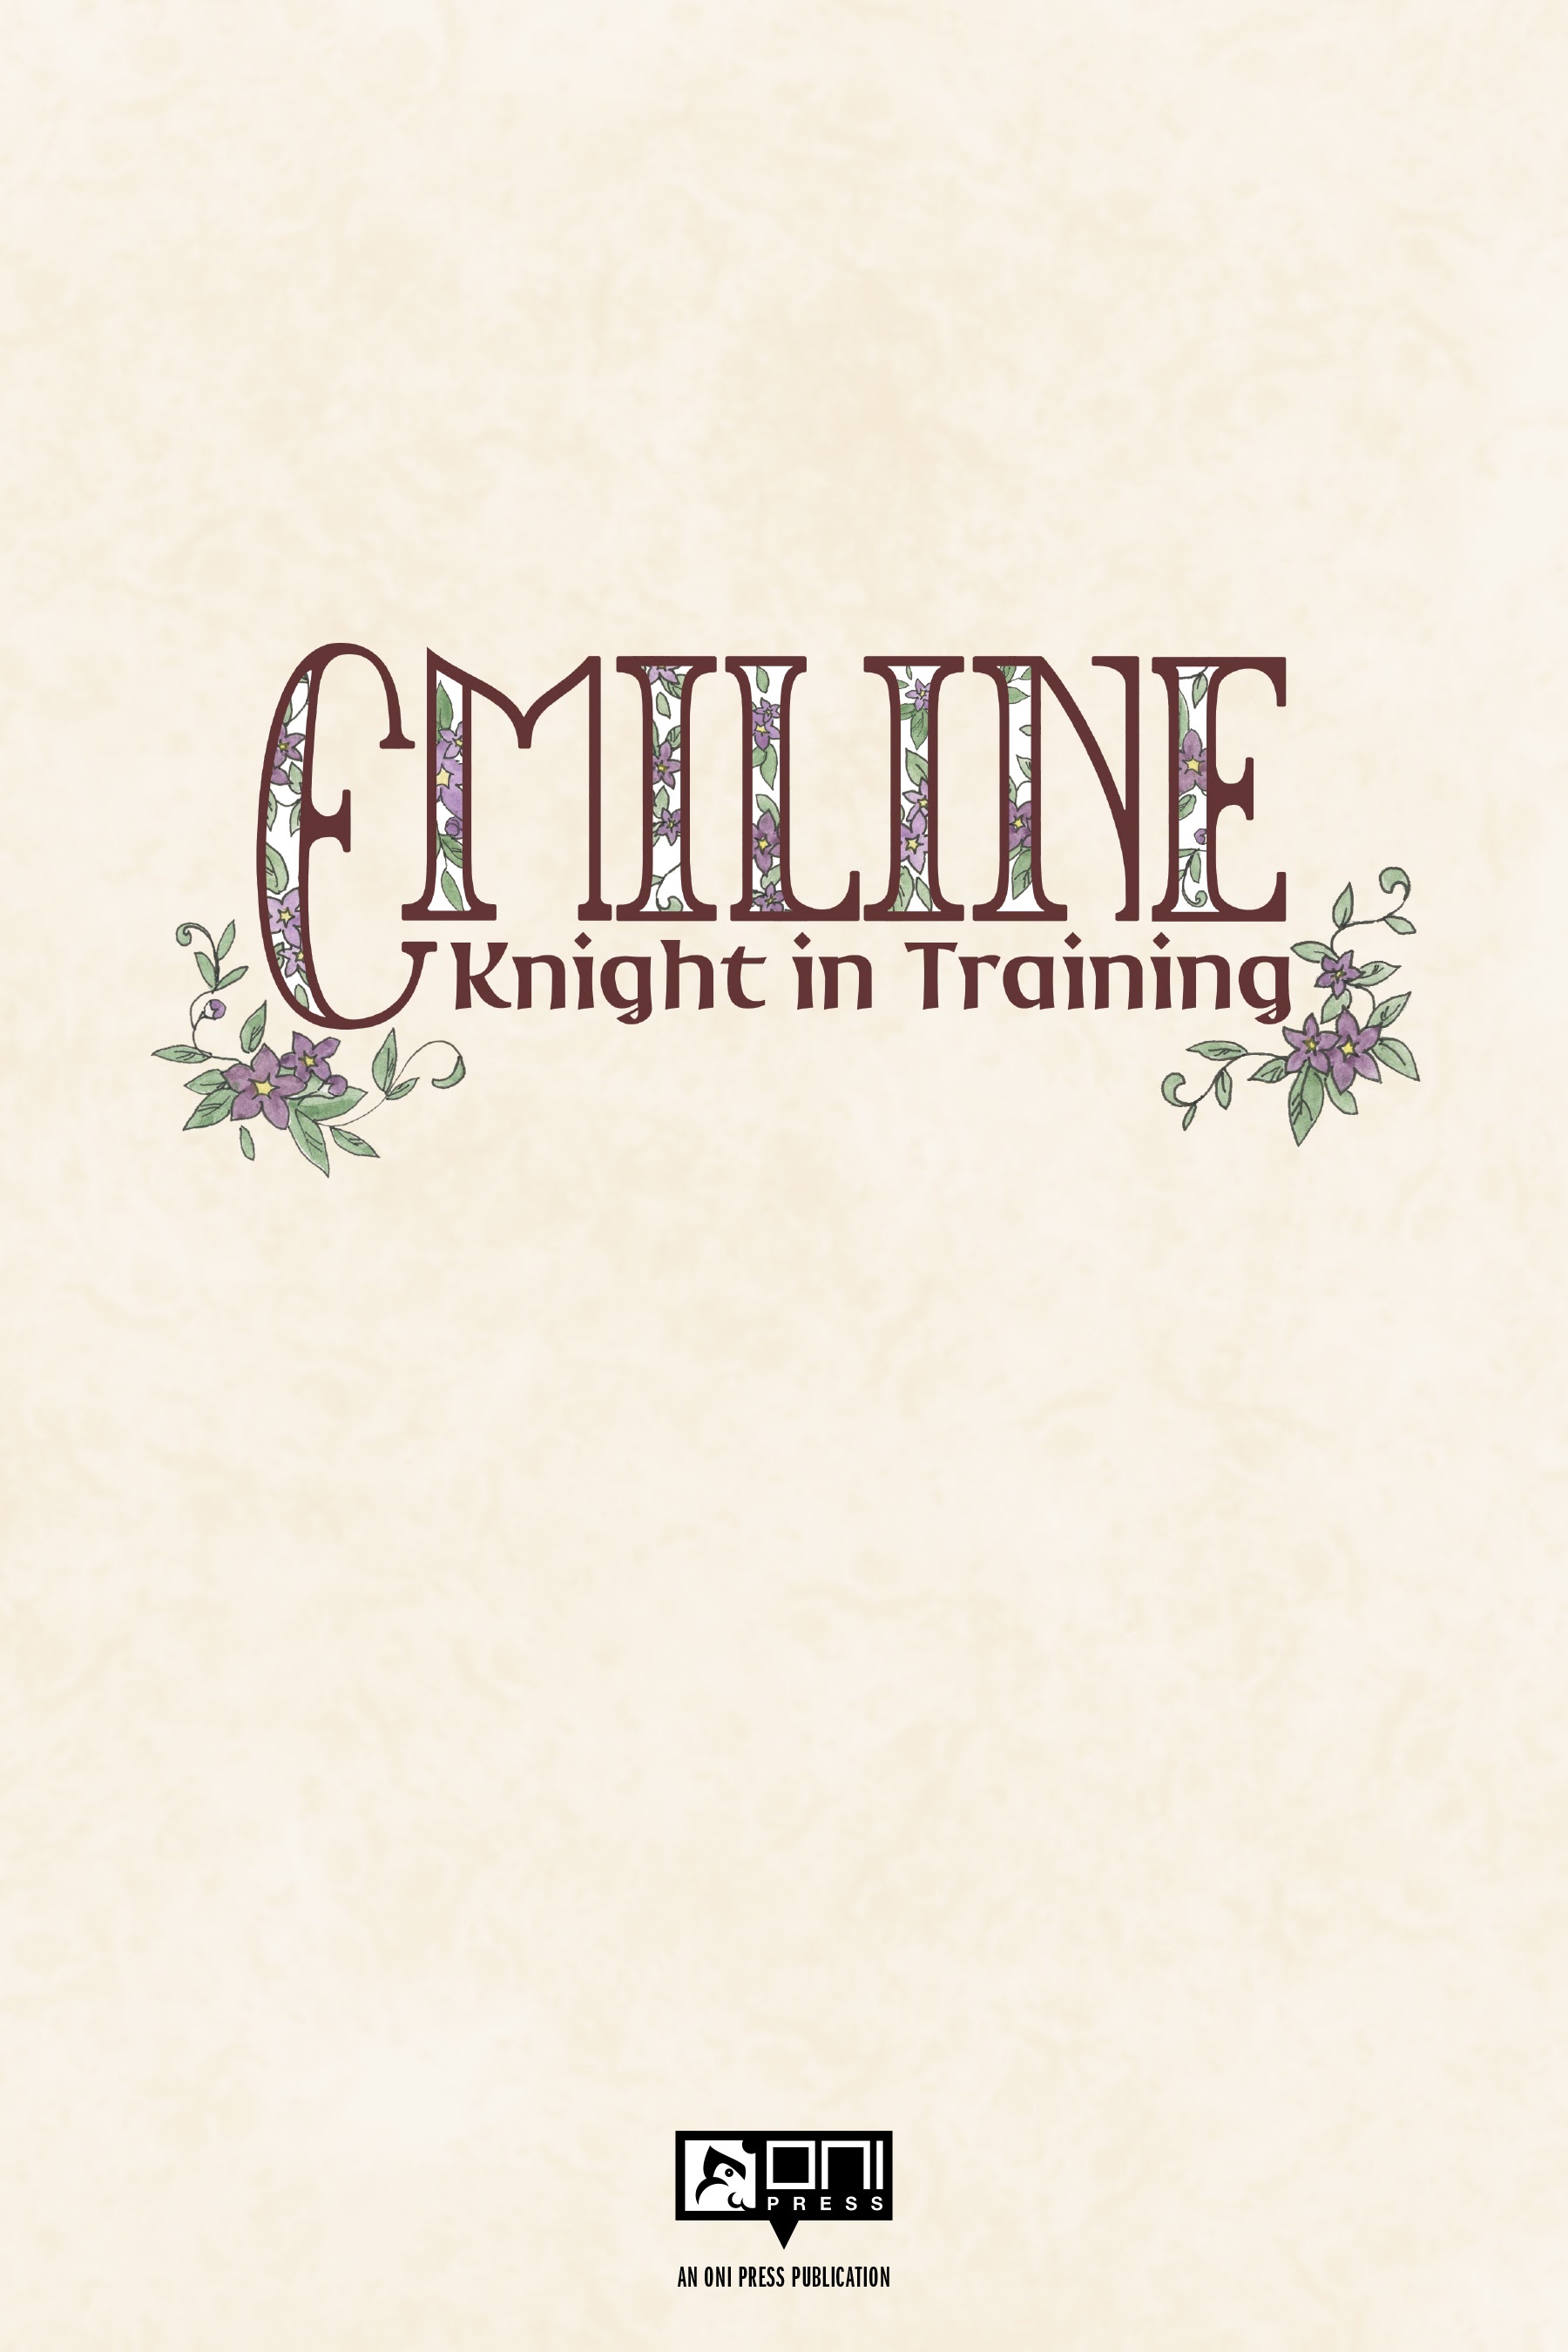 Read online Emiline: Knight in Training comic -  Issue # Full - 3